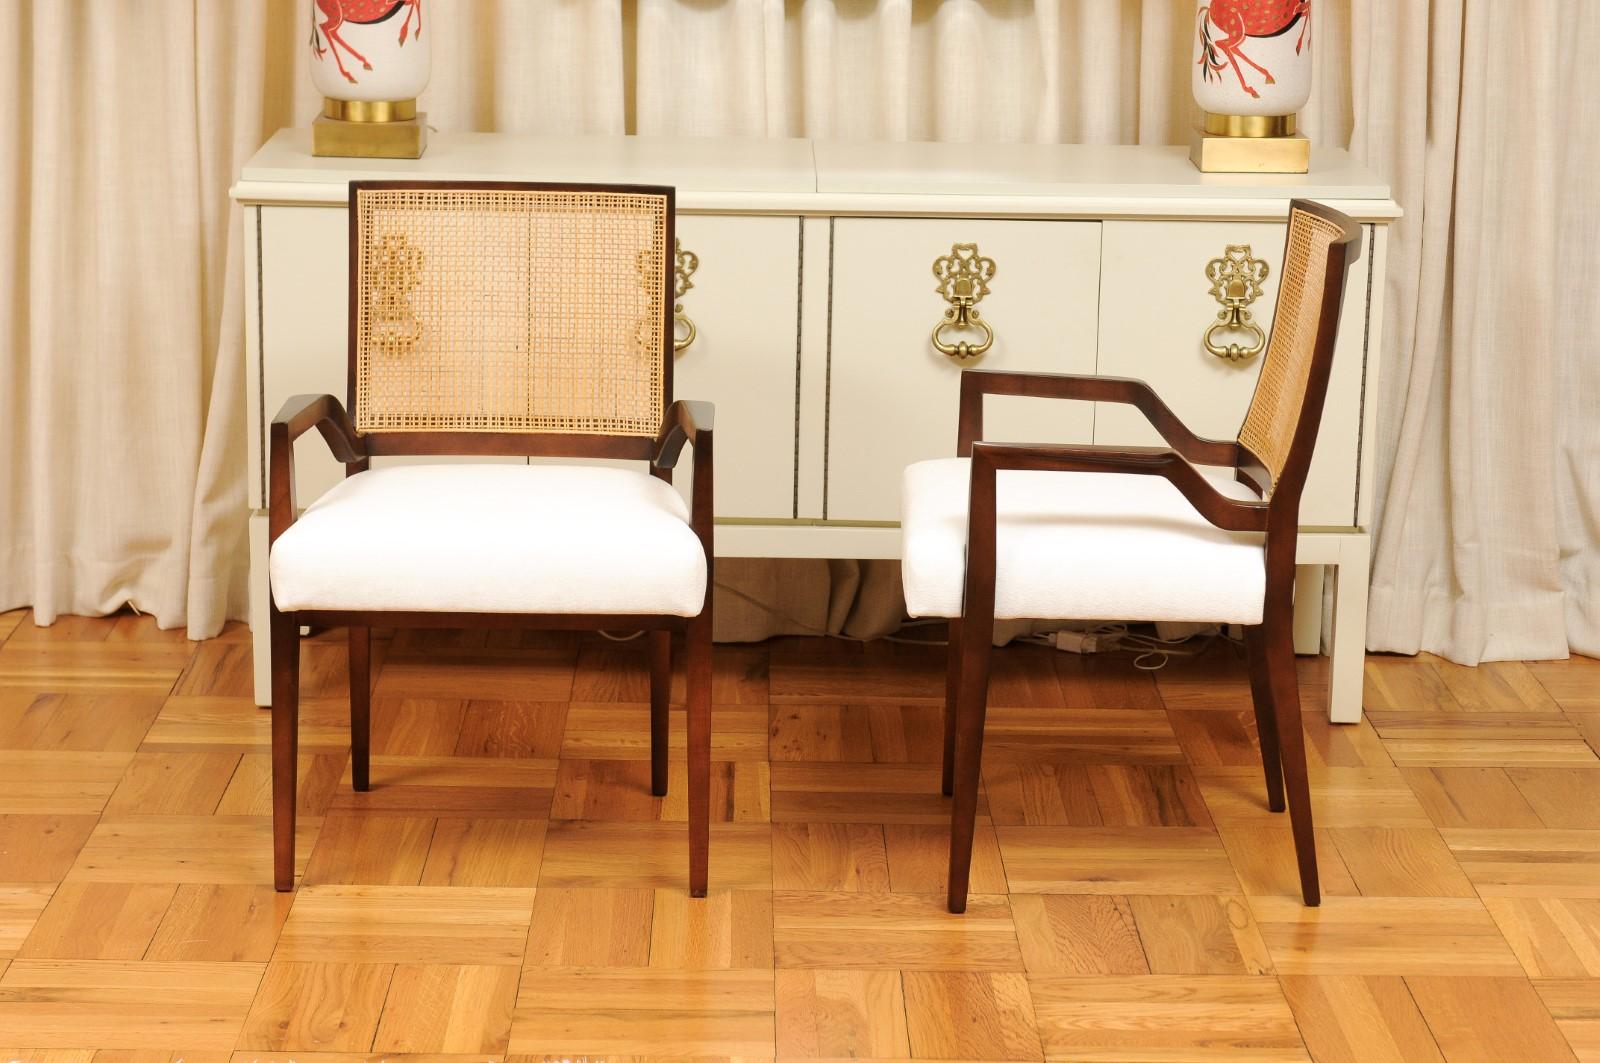 All Arms, Unrivaled Set of 12 Cane Dining Chairs by Michael Taylor, circa 1960 For Sale 5